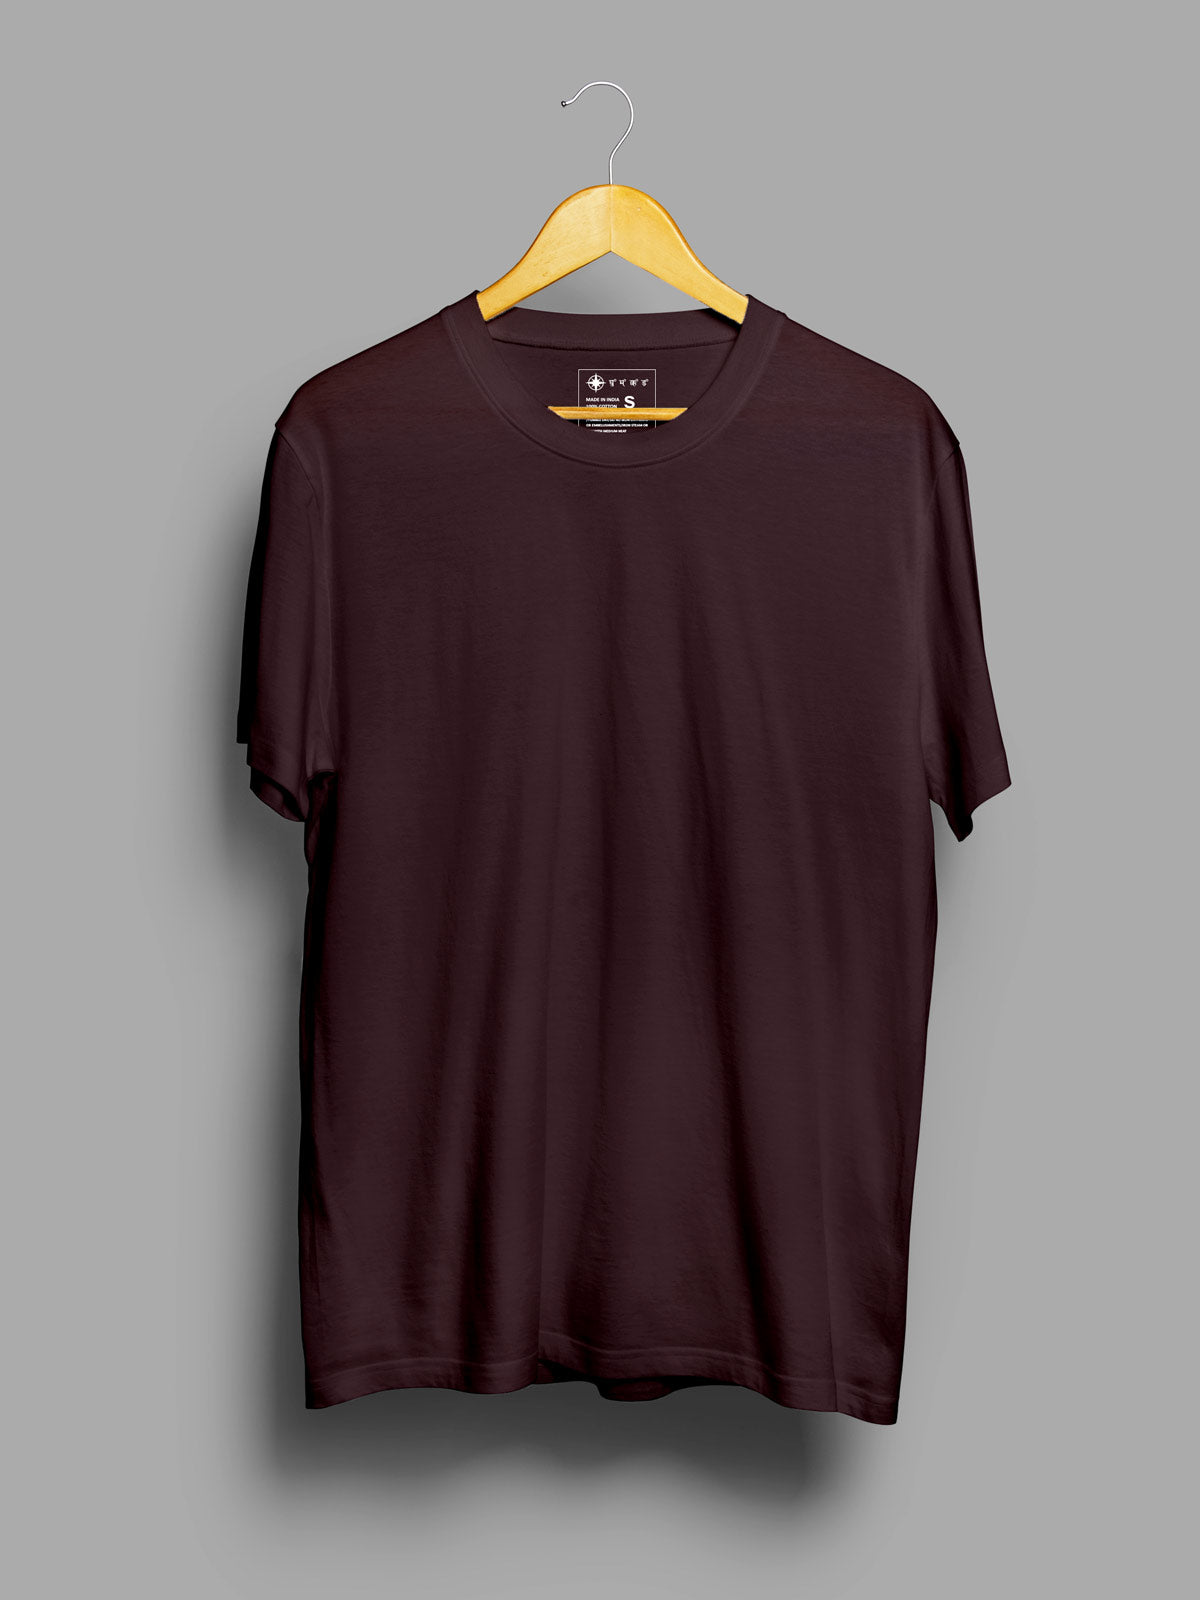 Coffee-brown-t-shirt-for-men by Ghumakkad